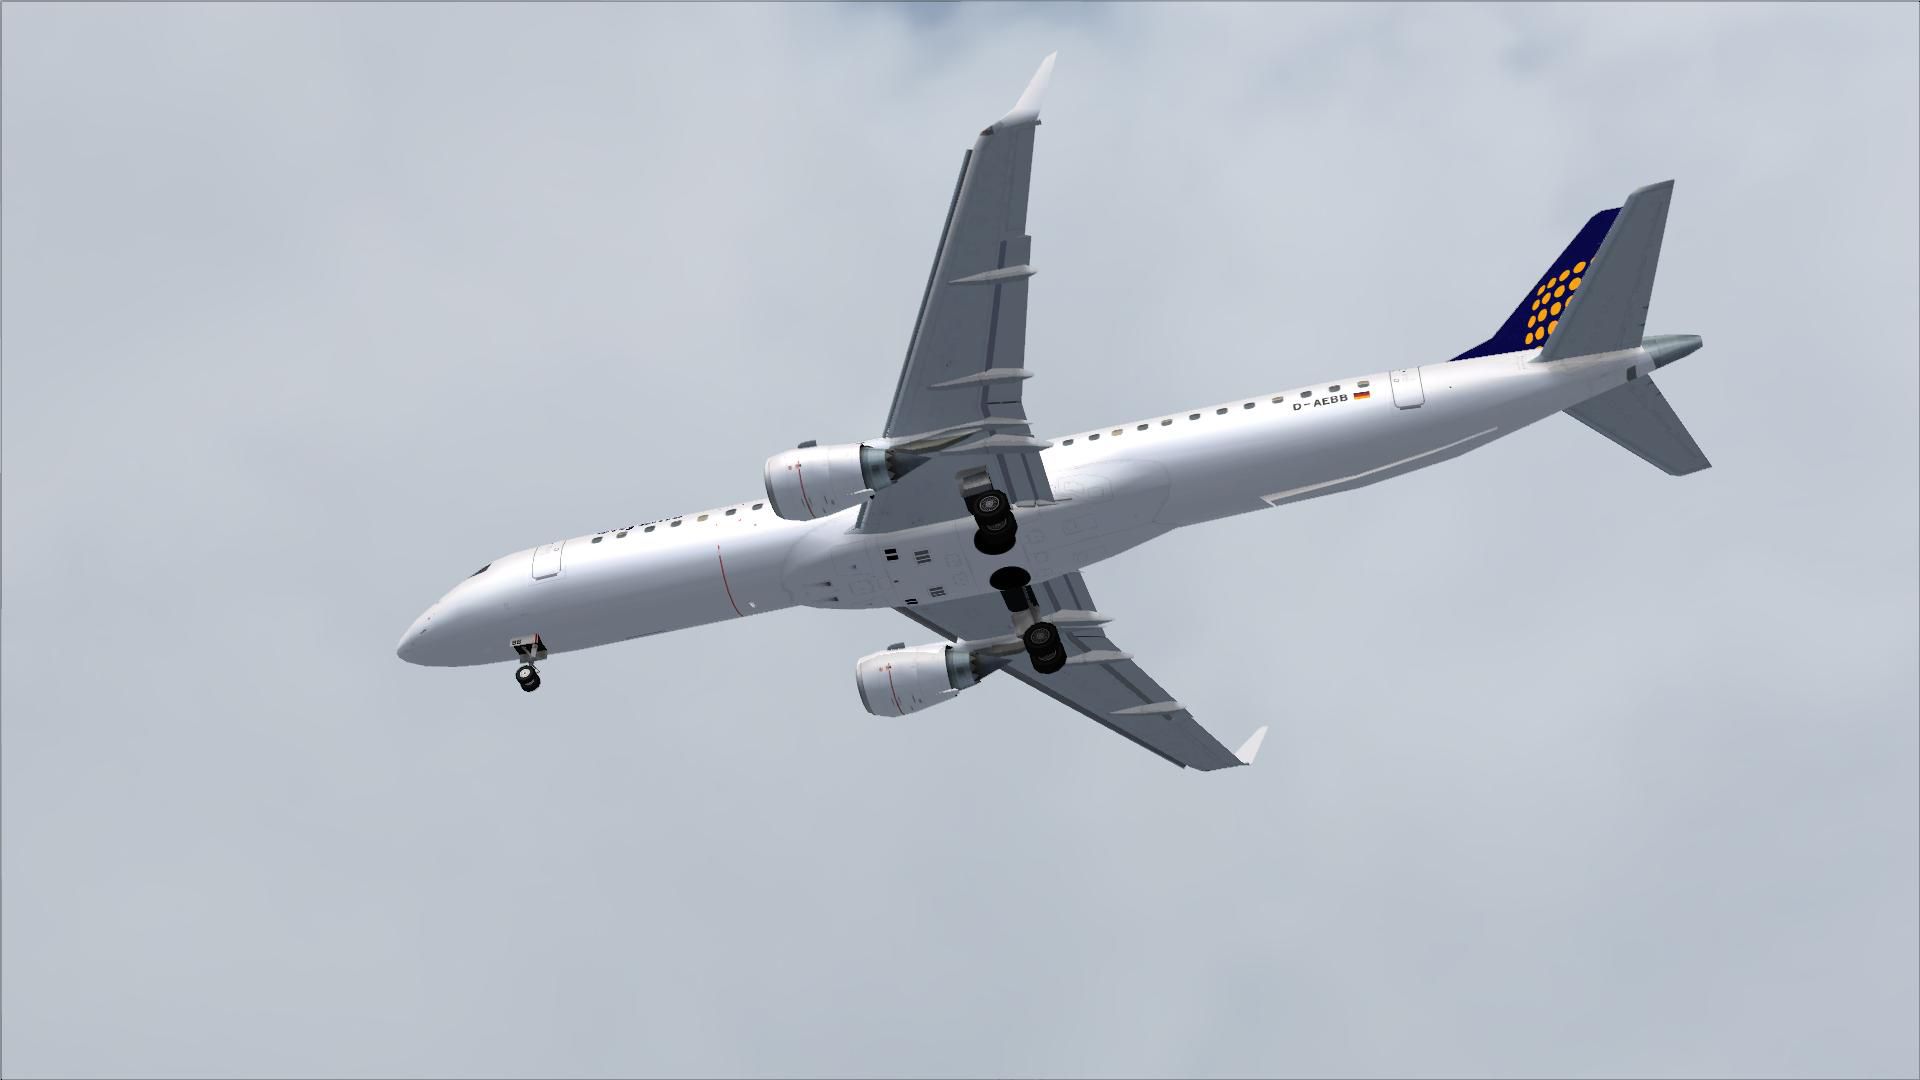 FSX: Steam Edition - Embraer E-Jets 175 & 195 Add-On on Steam